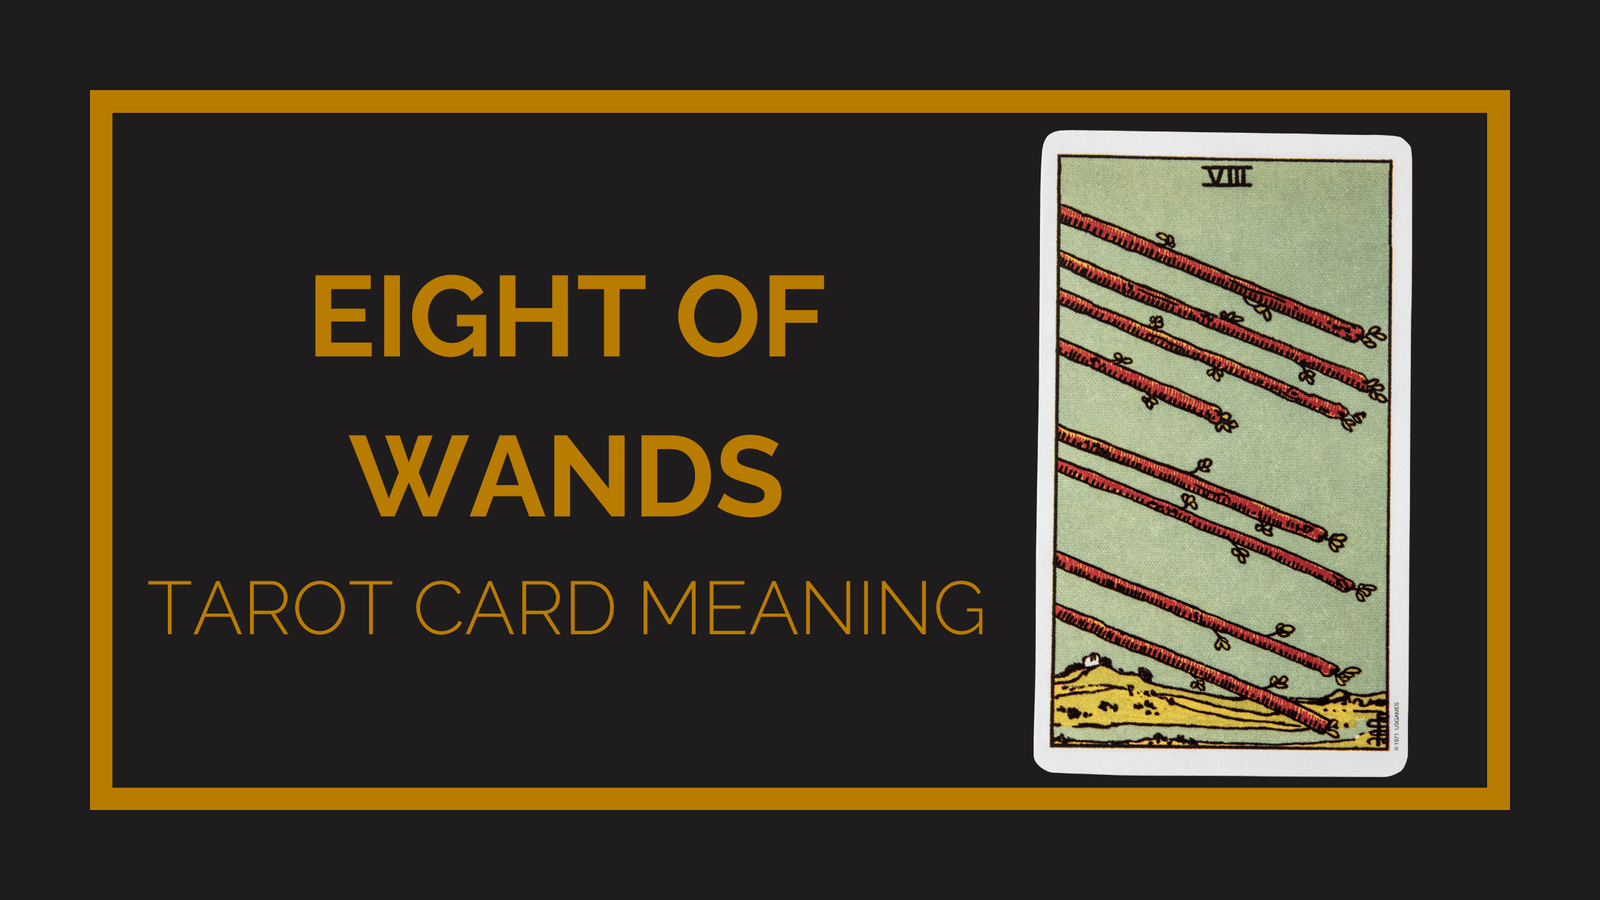 Eight of wands tarot card meaning | tarot with gord